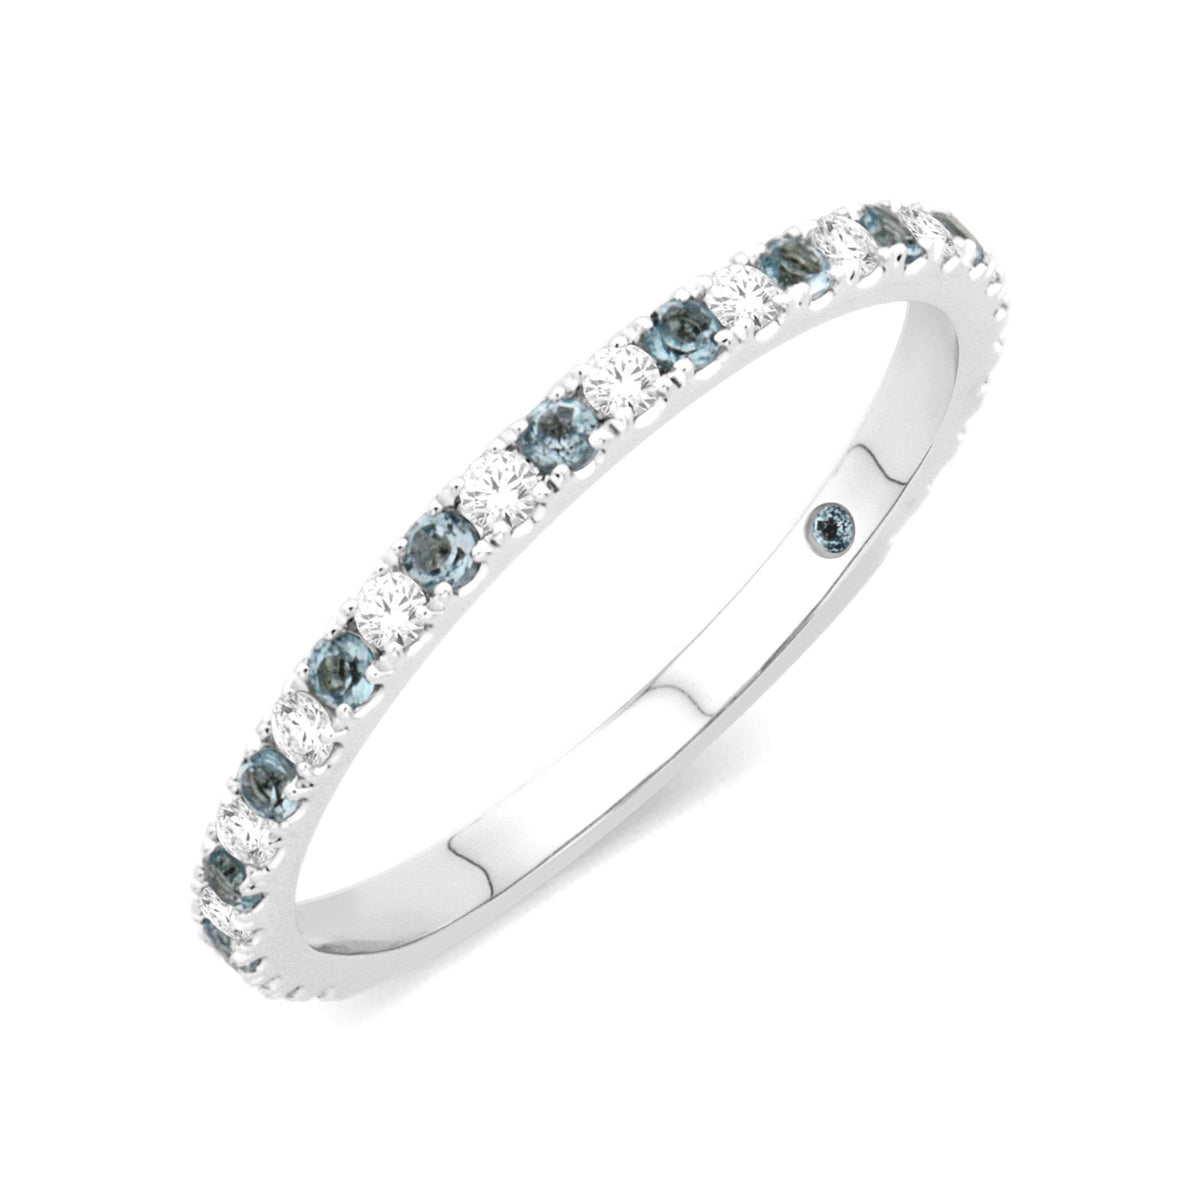 14Kt White Gold Stackable Gemstone Ring With Diamonds and Aquamarine